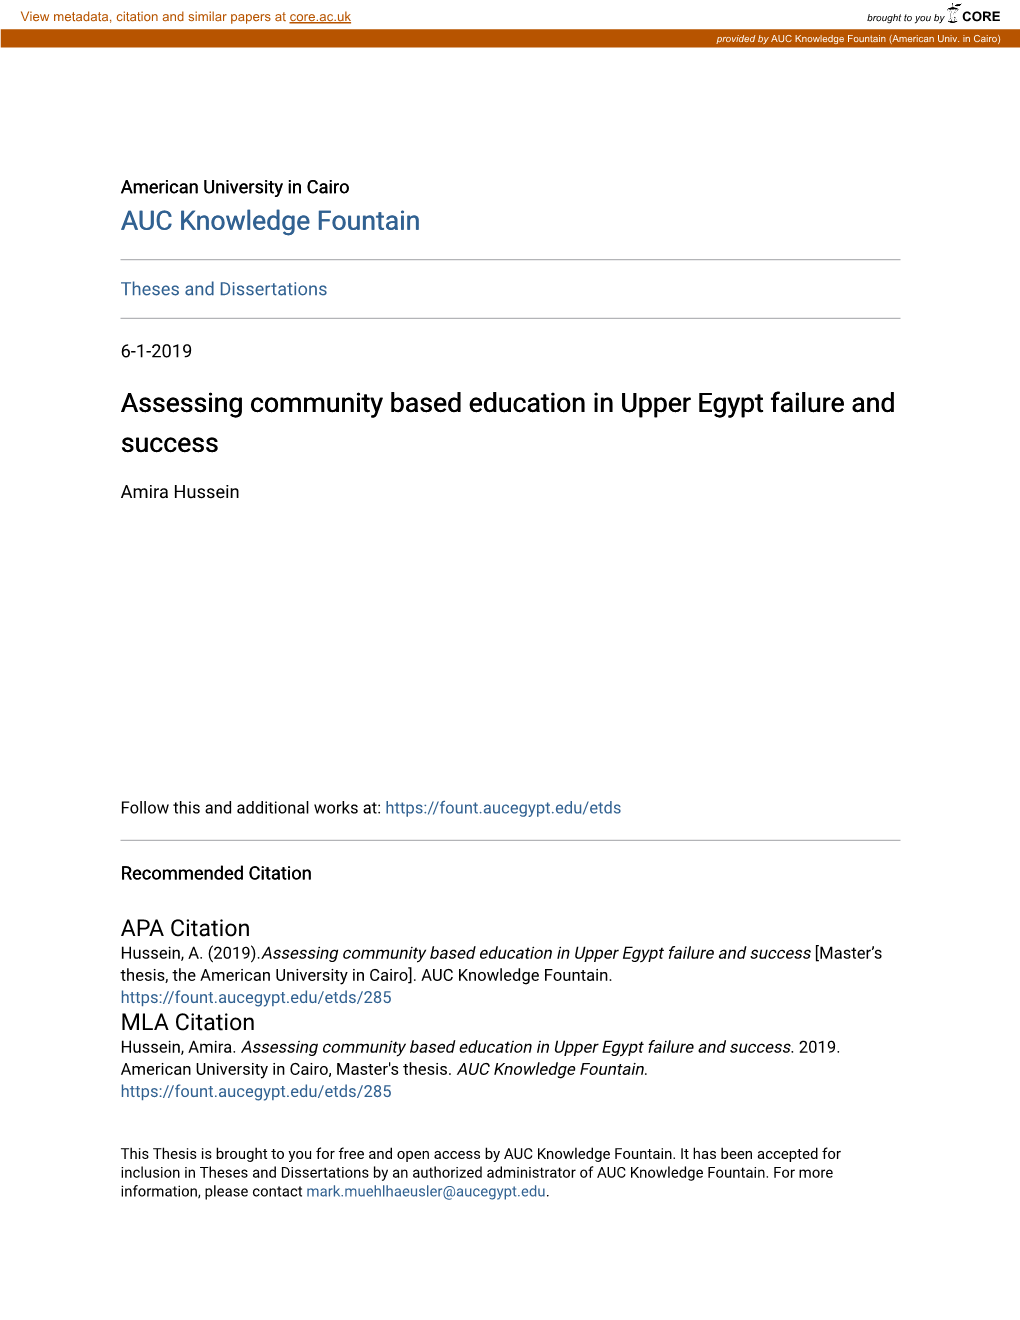 Assessing Community Based Education in Upper Egypt Failure and Success